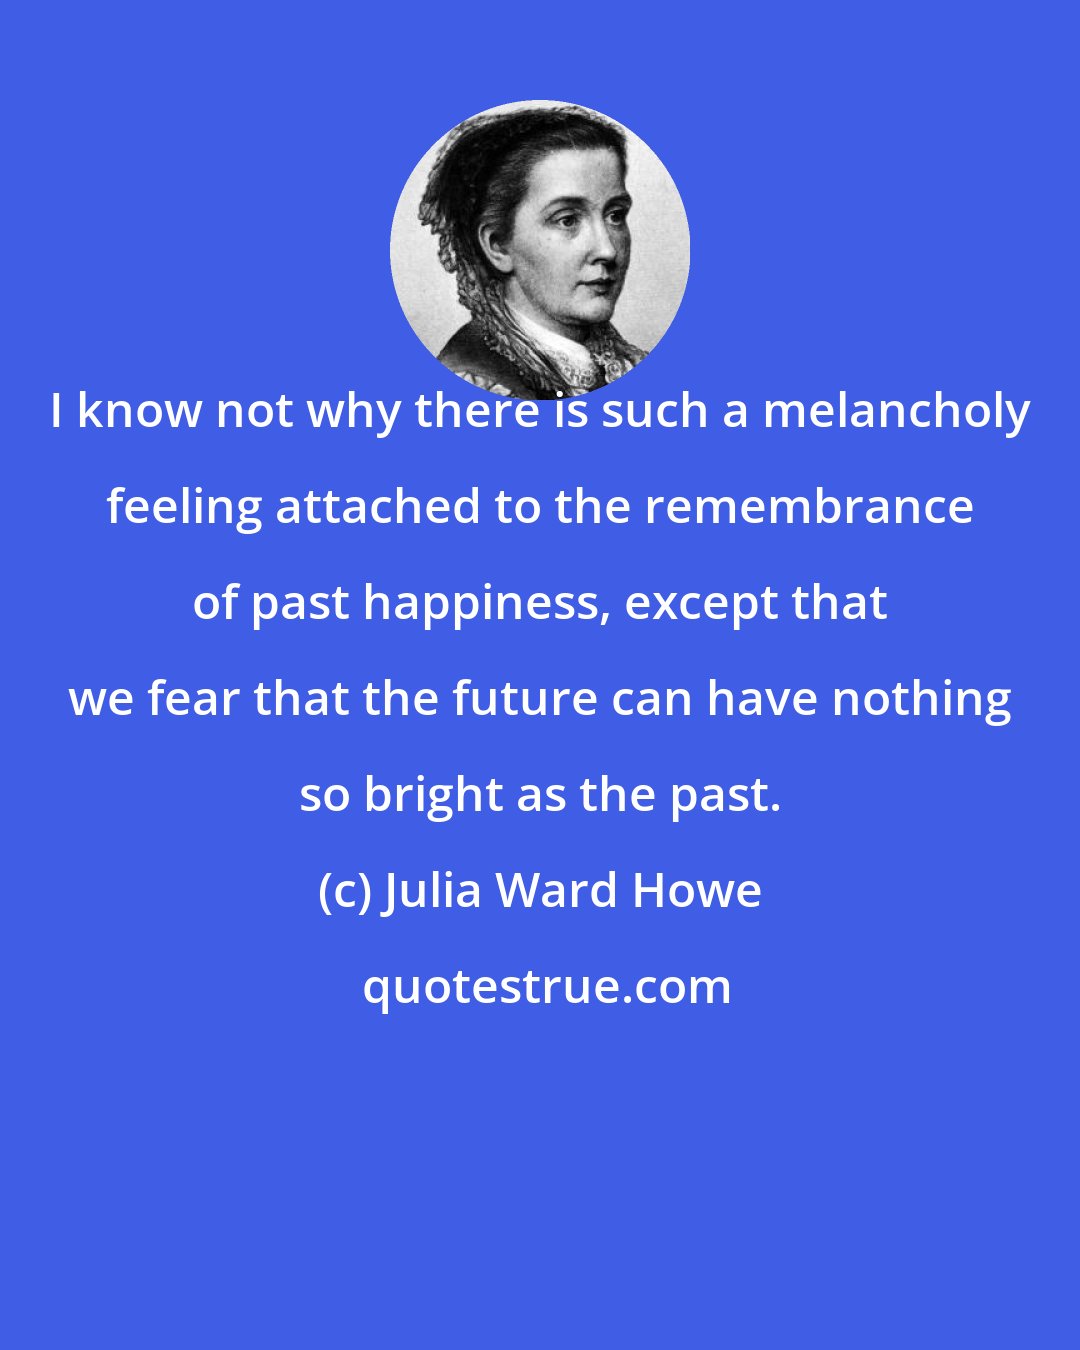 Julia Ward Howe: I know not why there is such a melancholy feeling attached to the remembrance of past happiness, except that we fear that the future can have nothing so bright as the past.